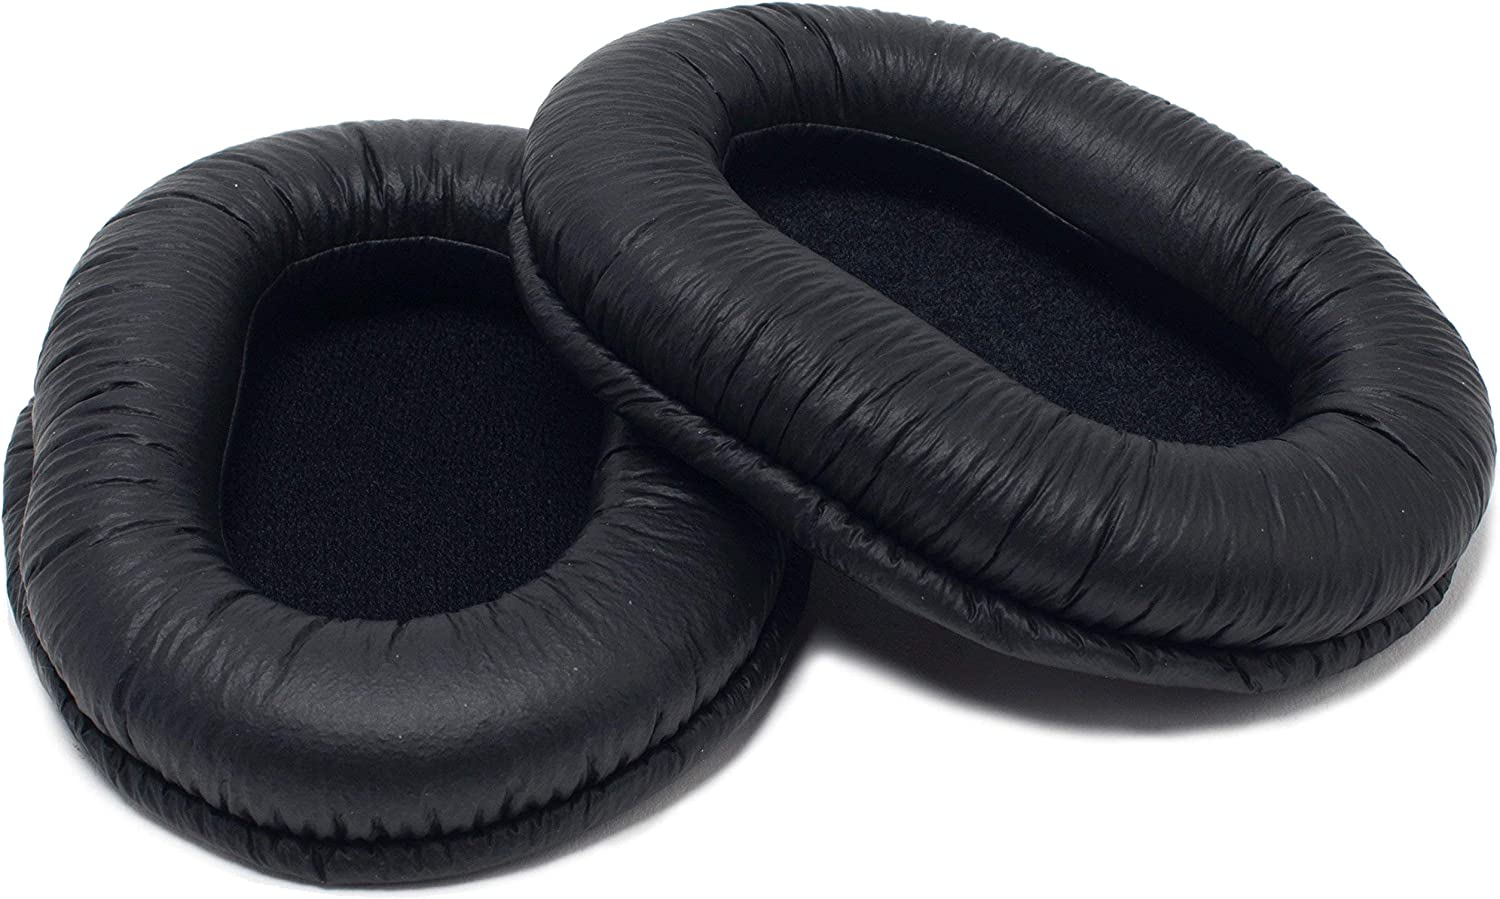 Genuine Replacement Ear Pads cushions for SONY MDR-7506, MDR-V6